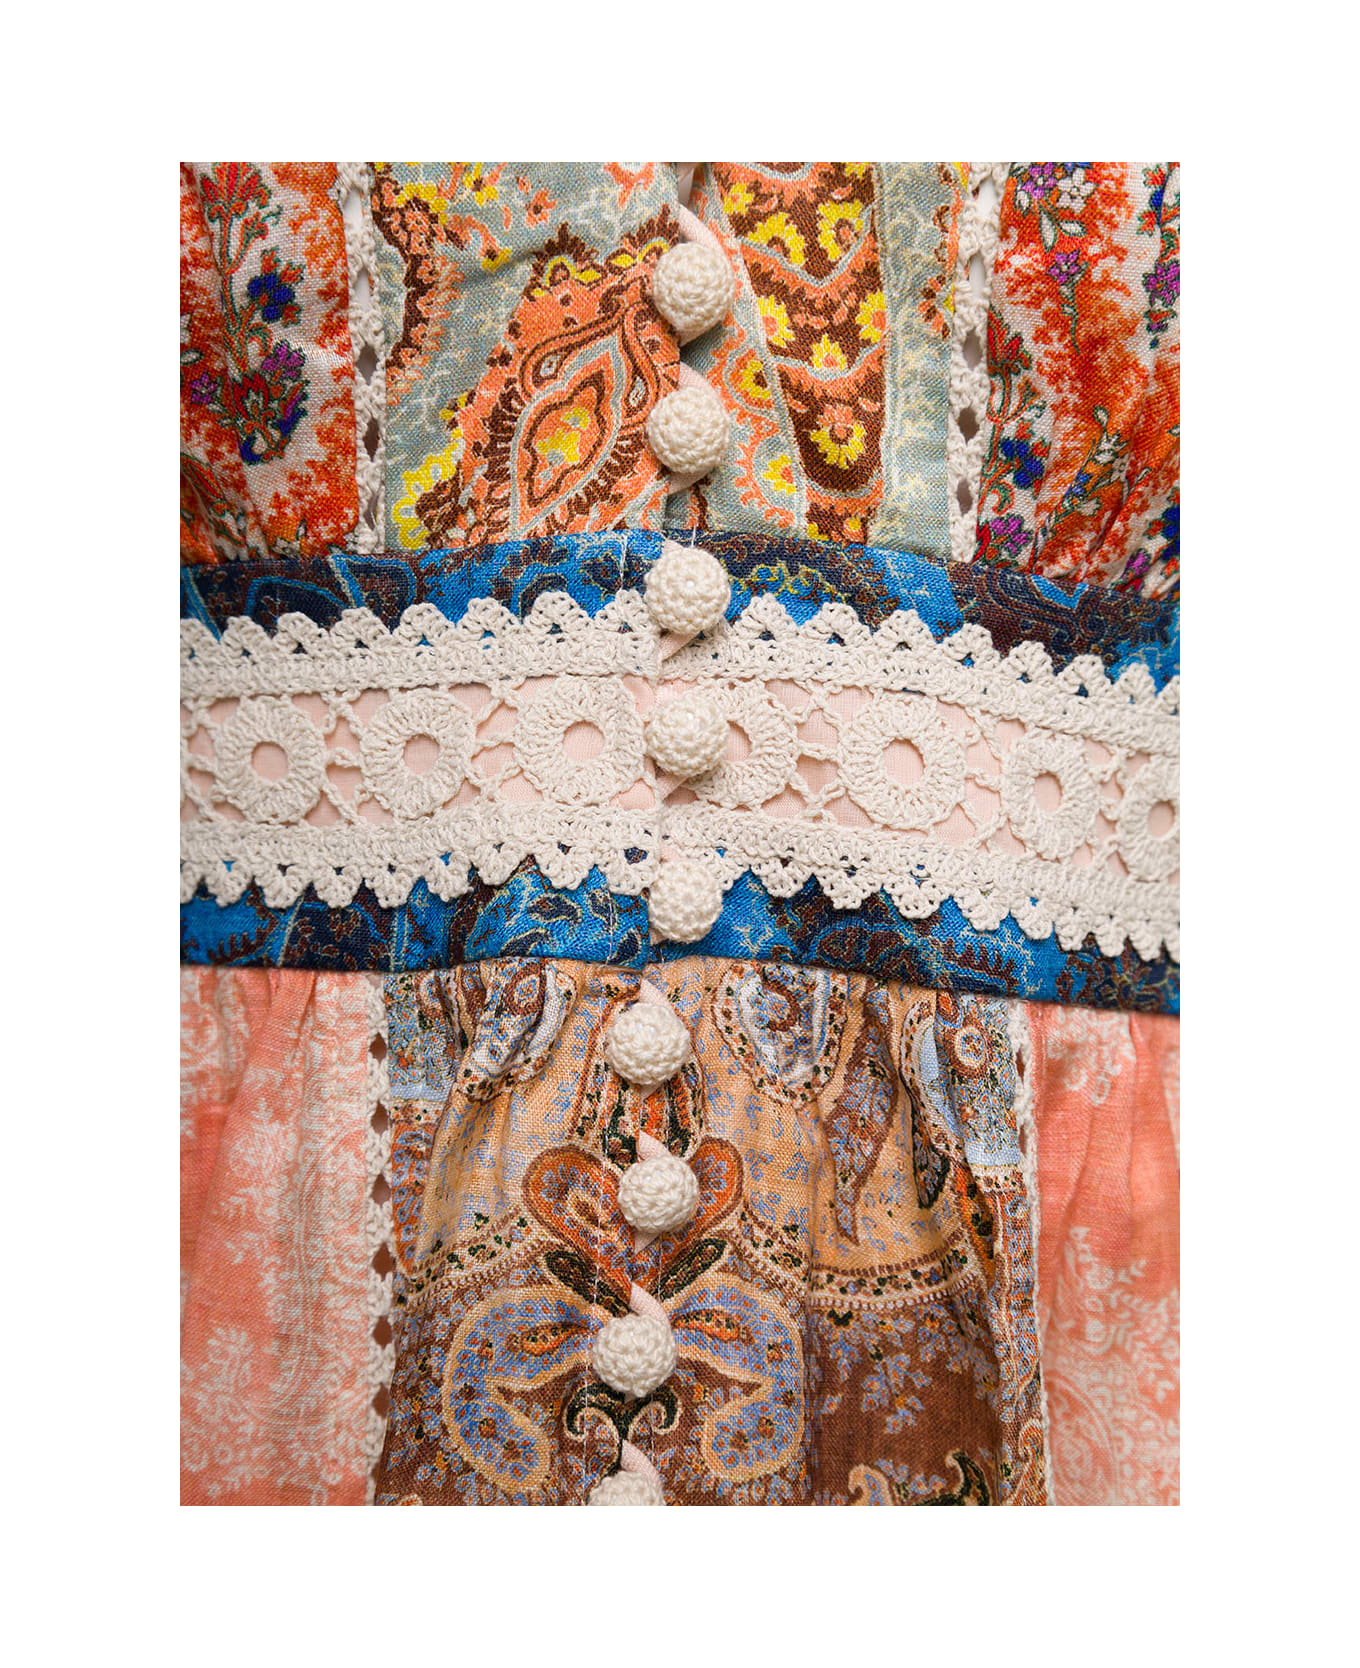 Zimmermann Mini Multicolor Dress With Puff Sleeves And All-over Paisley Print In Linen Woman - Multicolor